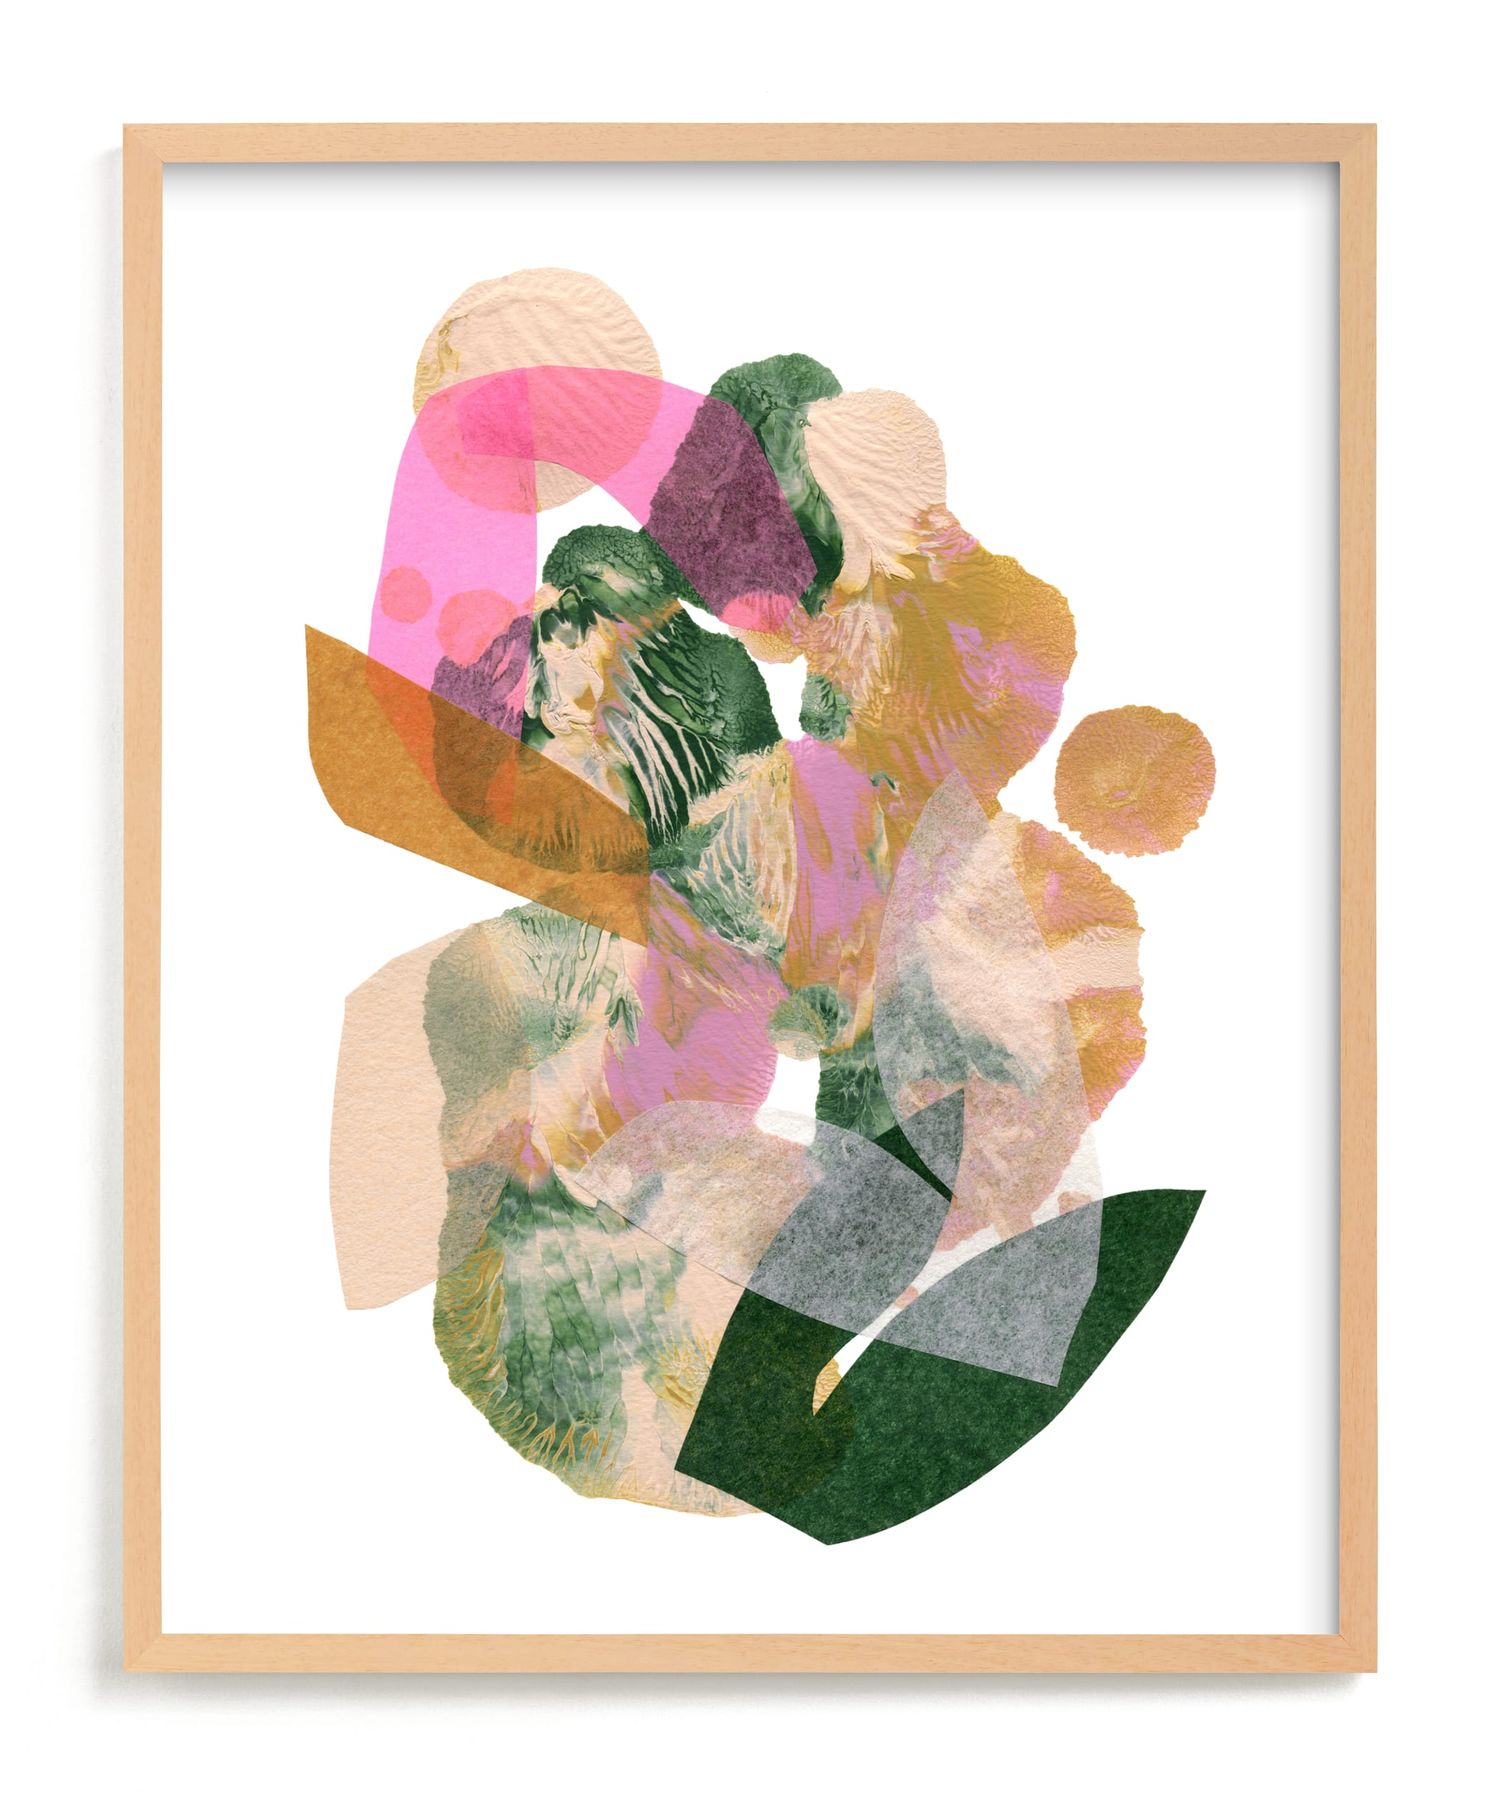 Shop Botanical Storm by Carrie Moradi (18x24), Natural Raw Wood Frame from Minted on Openhaus